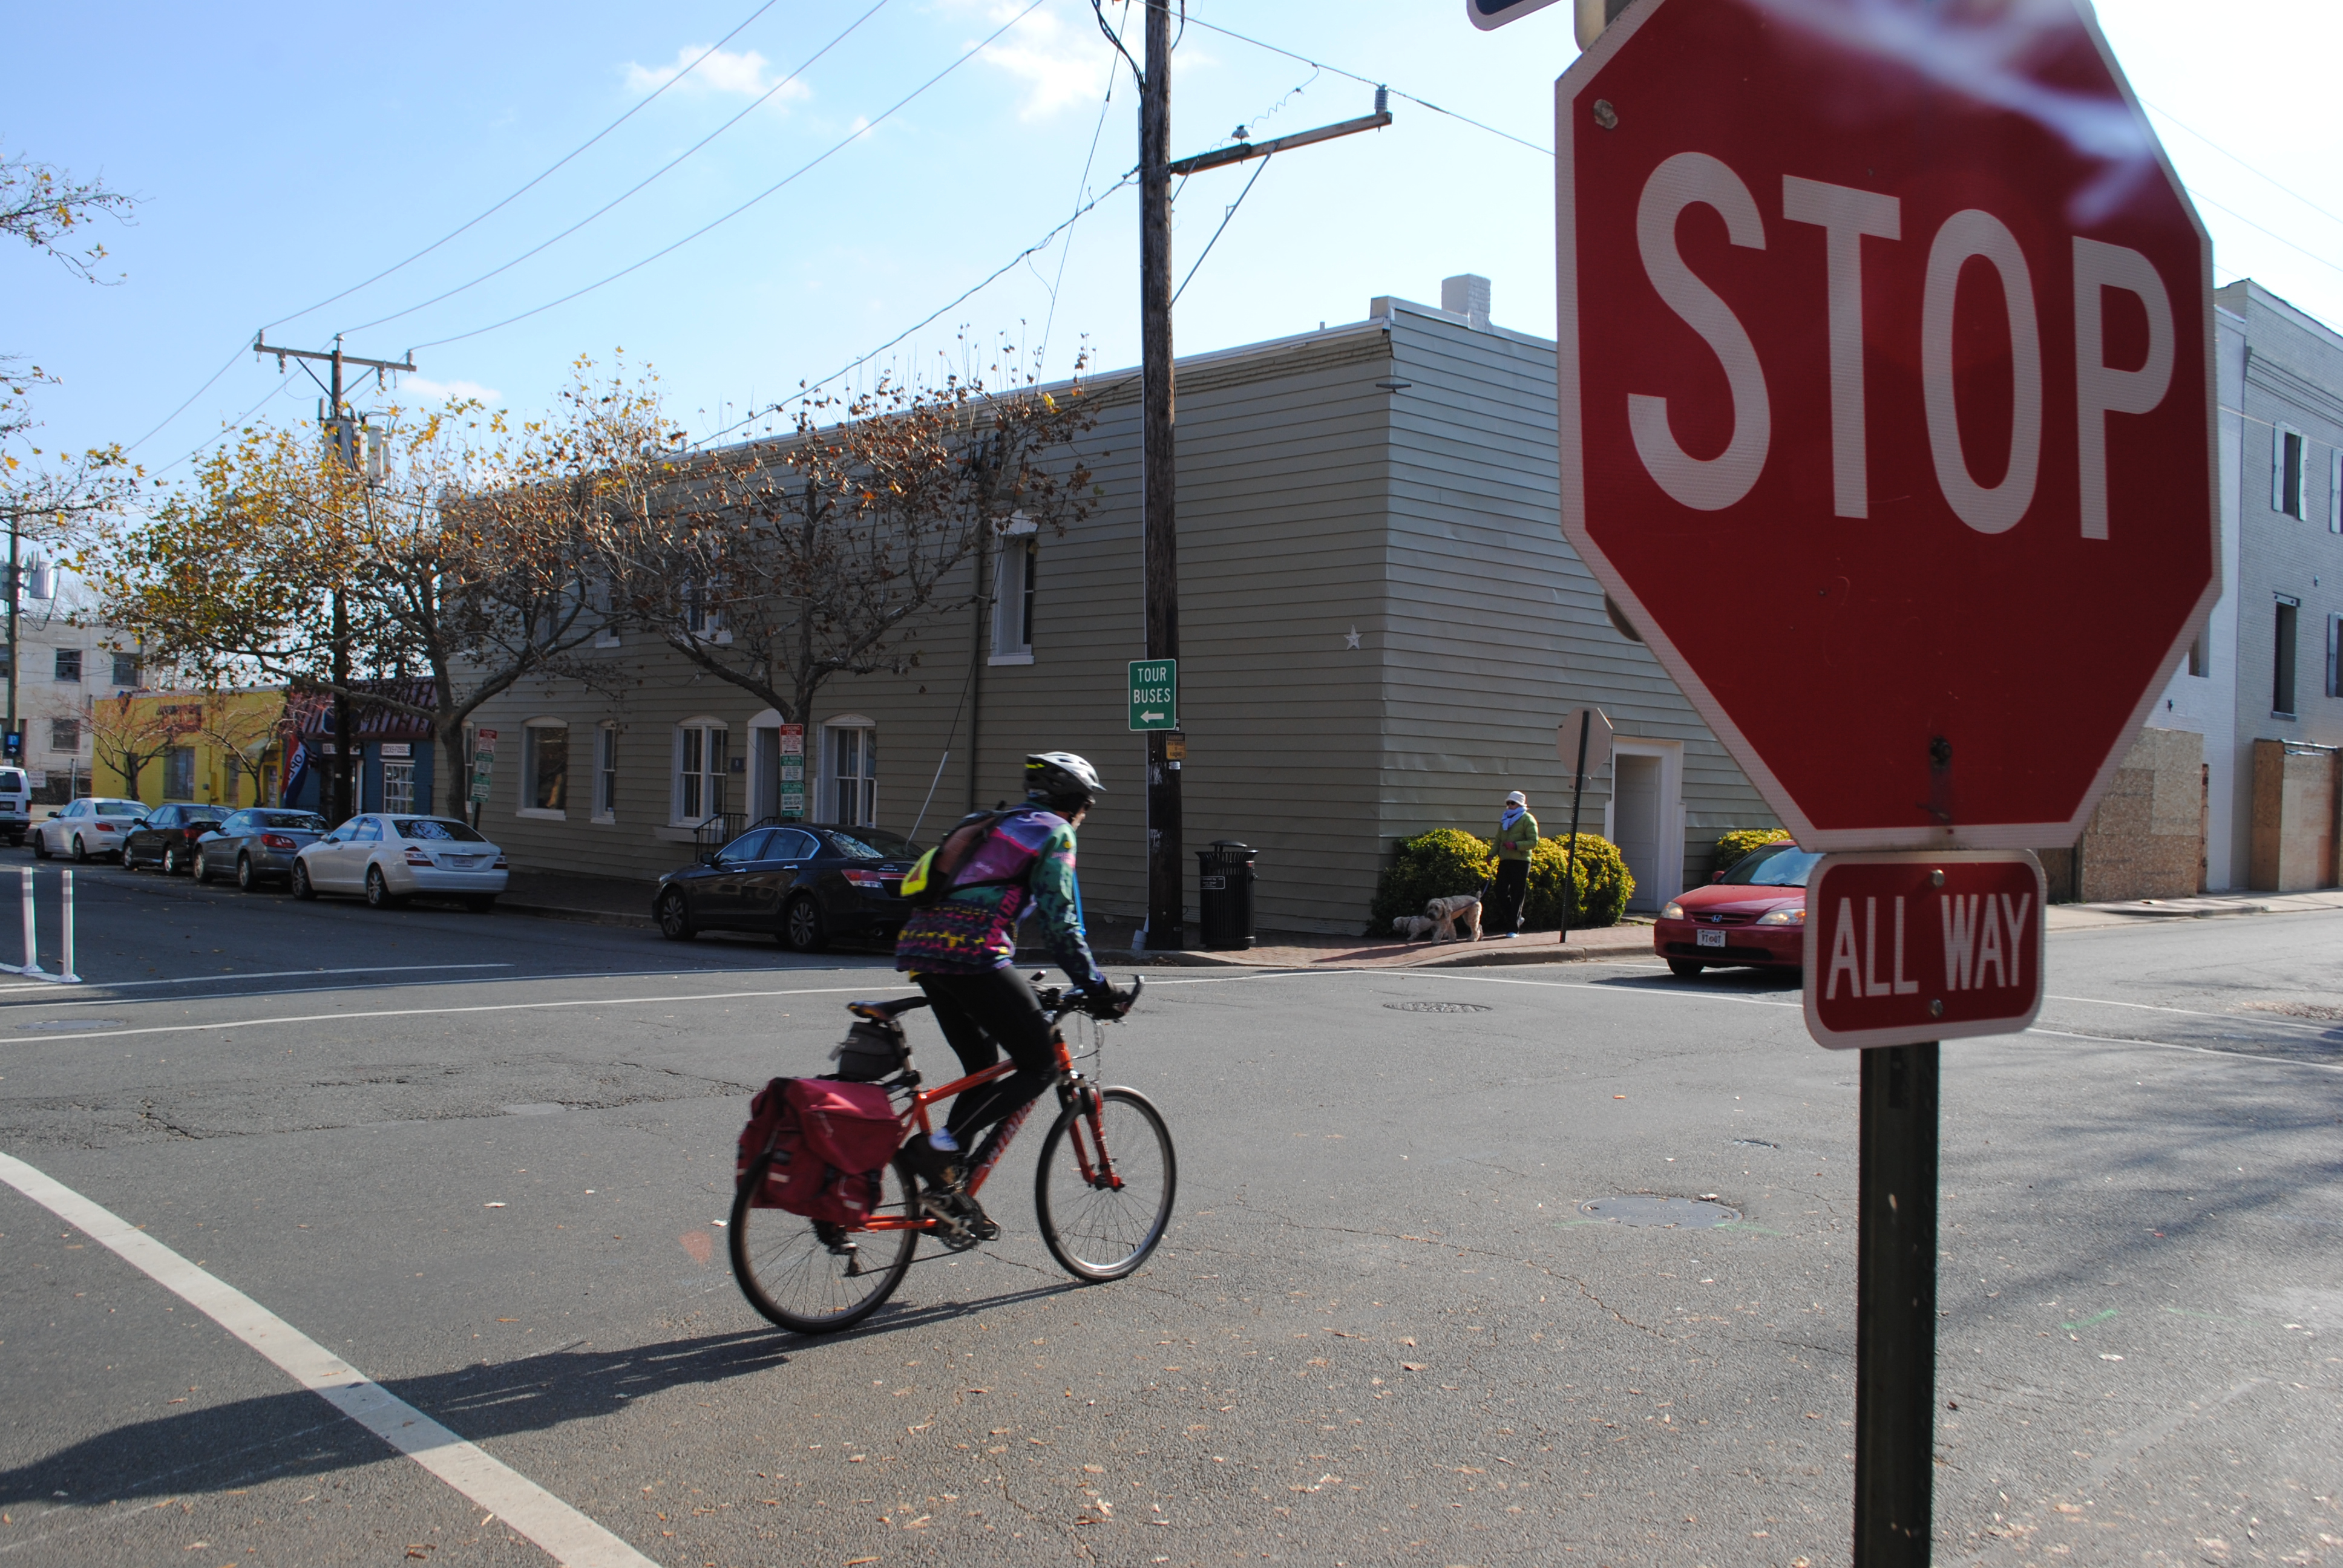 Your Views: Cyclists must stop at intersections